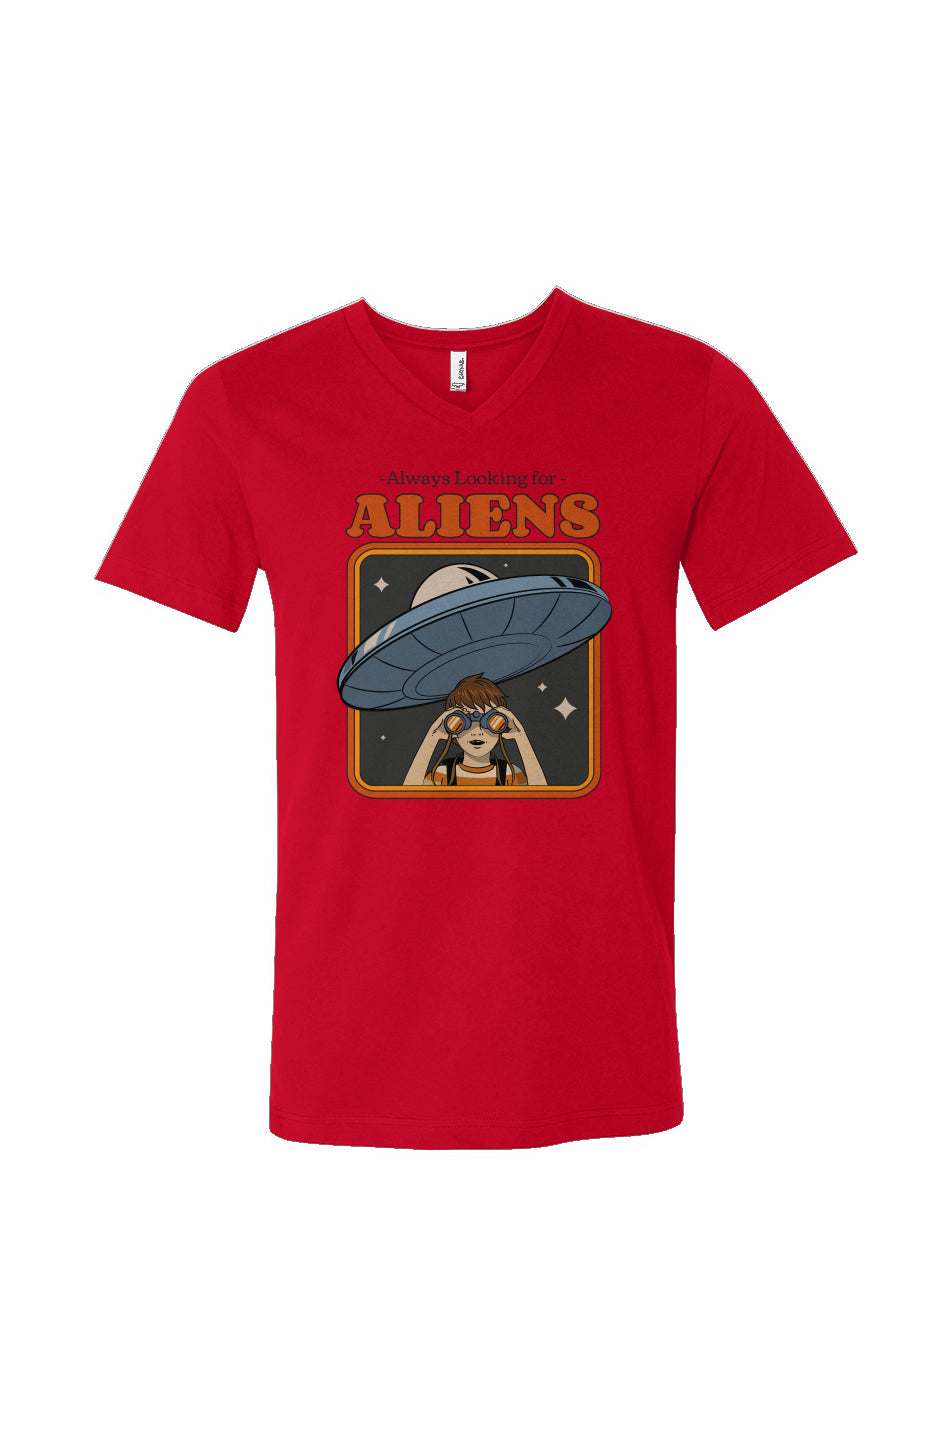 Unisex Fit - "Always Looking for Aliens" V-Neck  